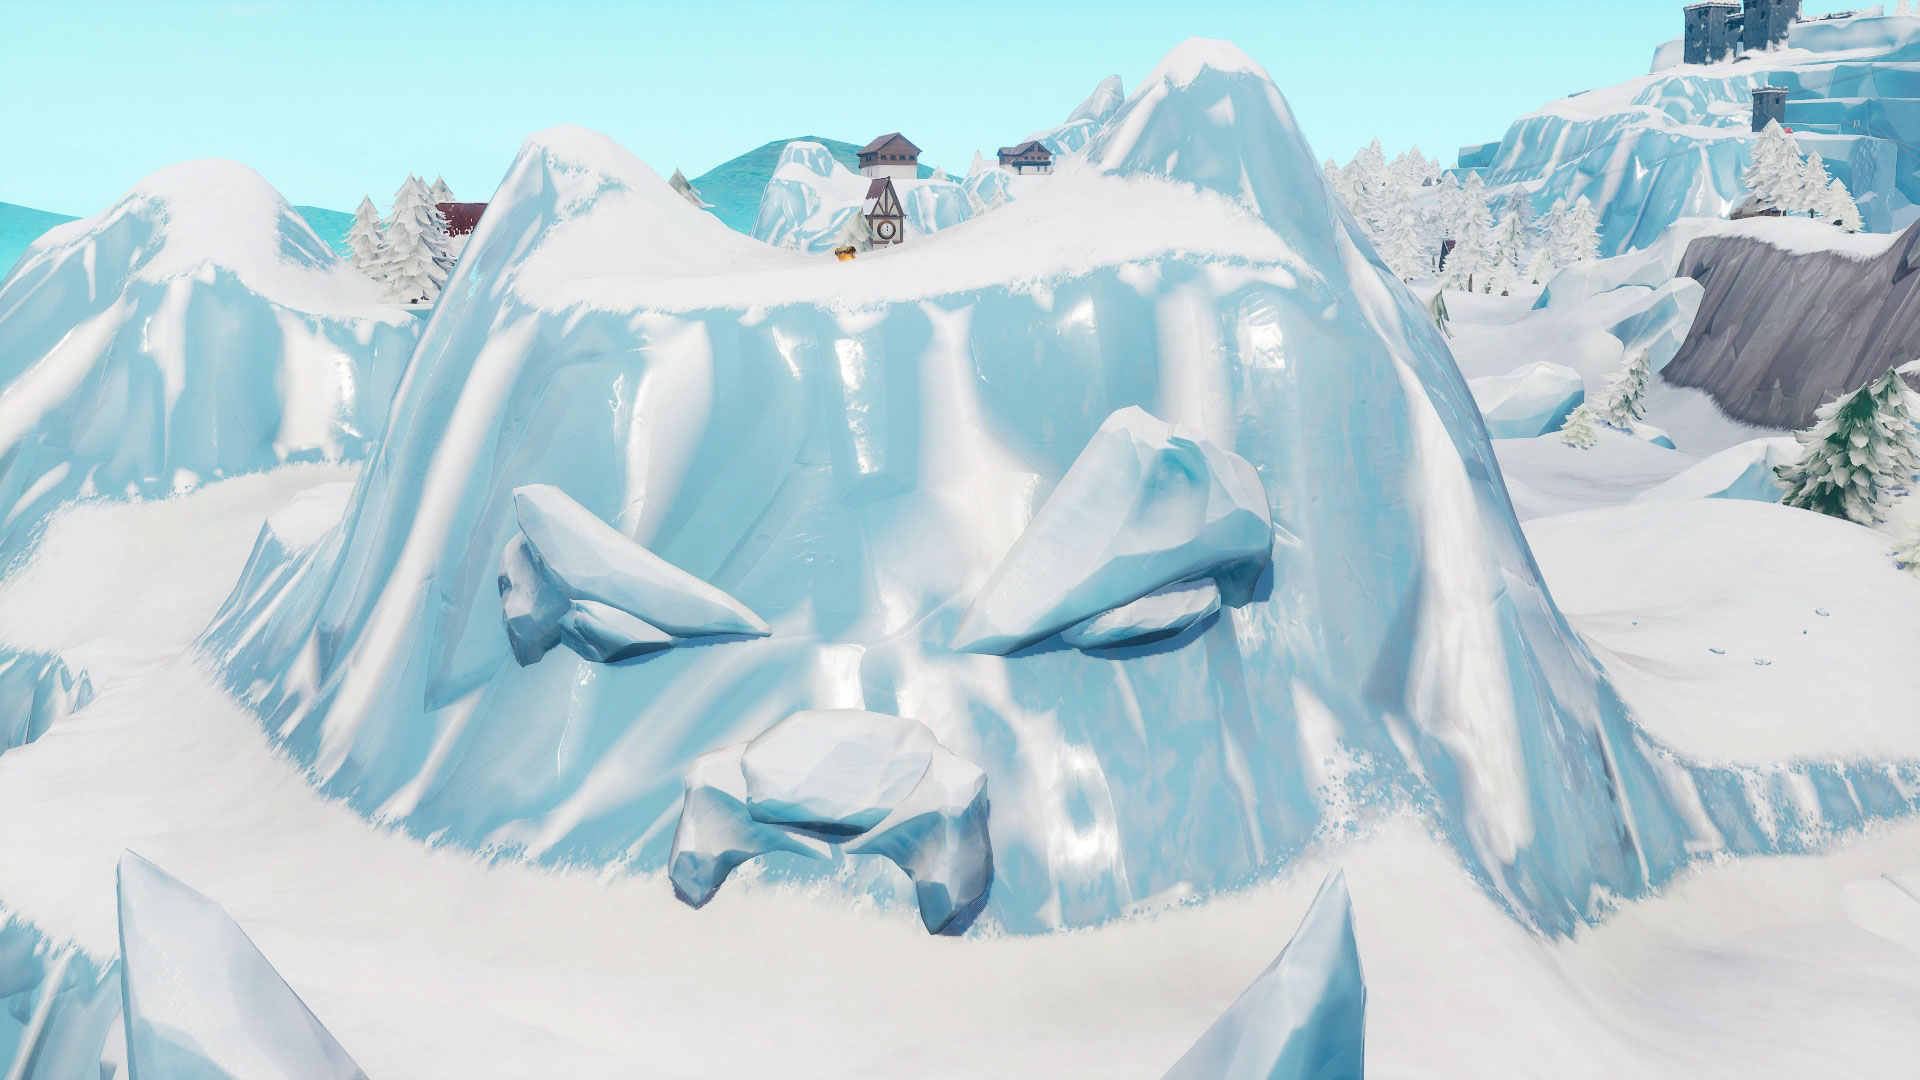 where to visit a giant face in the desert the jungle and the snow in fortnite season 8 week 1 challenge gamesradar - visit giant face in the desert the jungle in the snow fortnite challenge